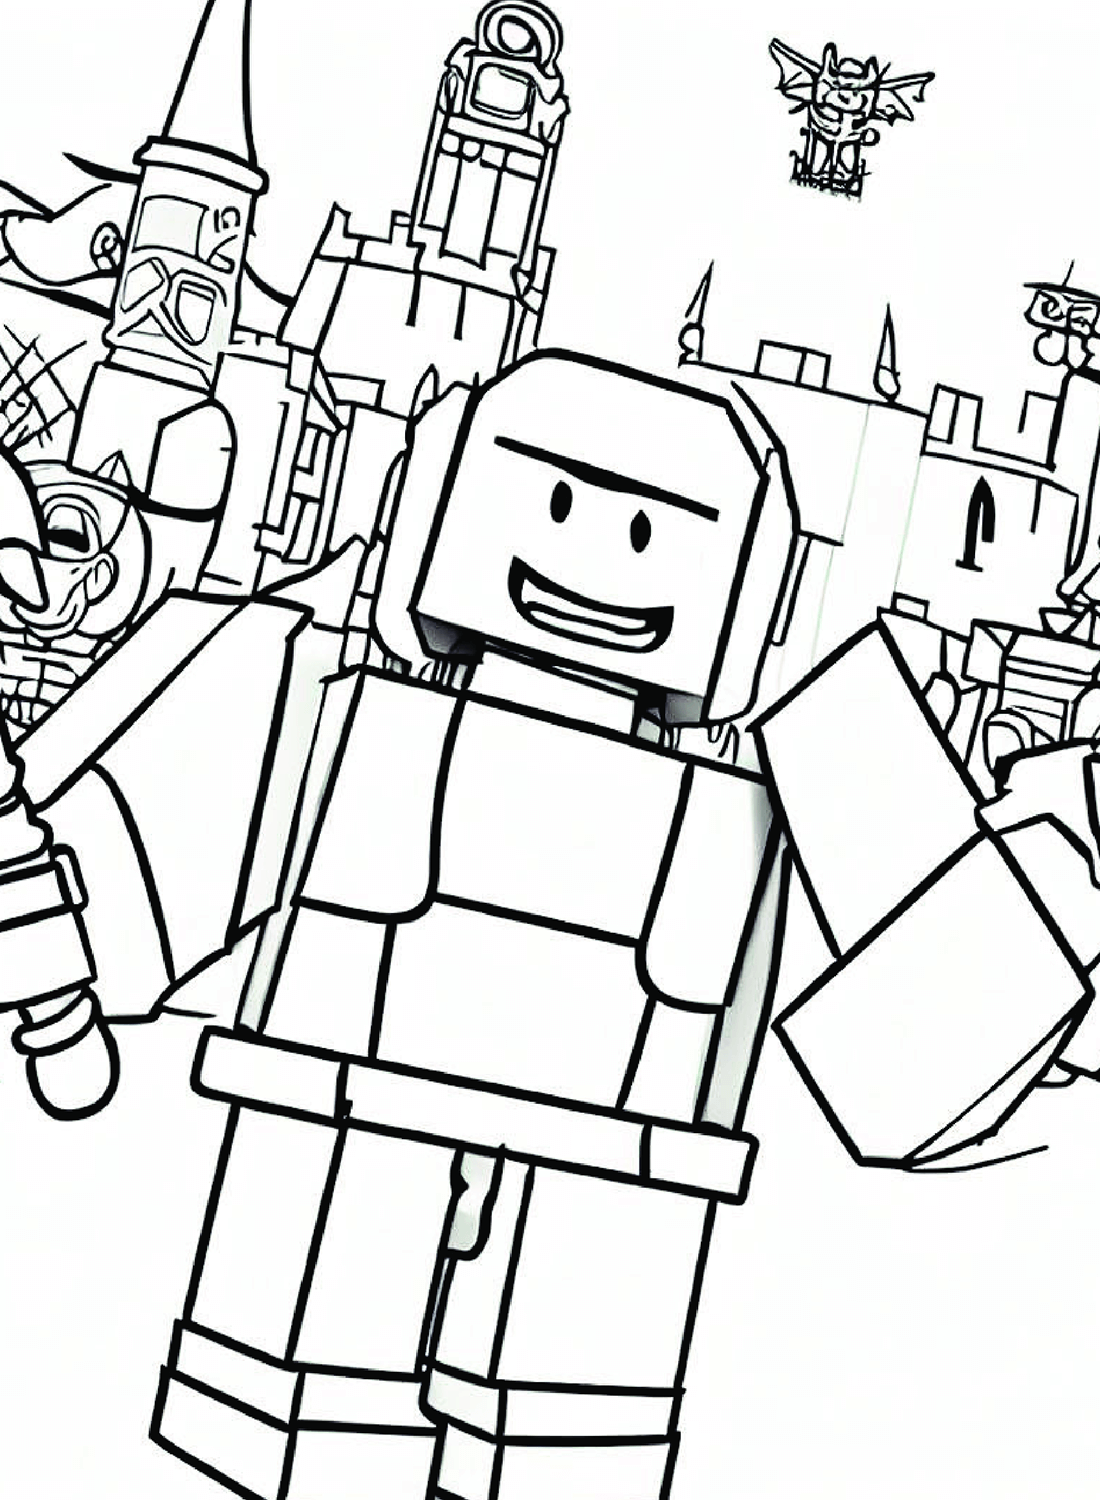 Jailbreak Roblox Coloring Pages